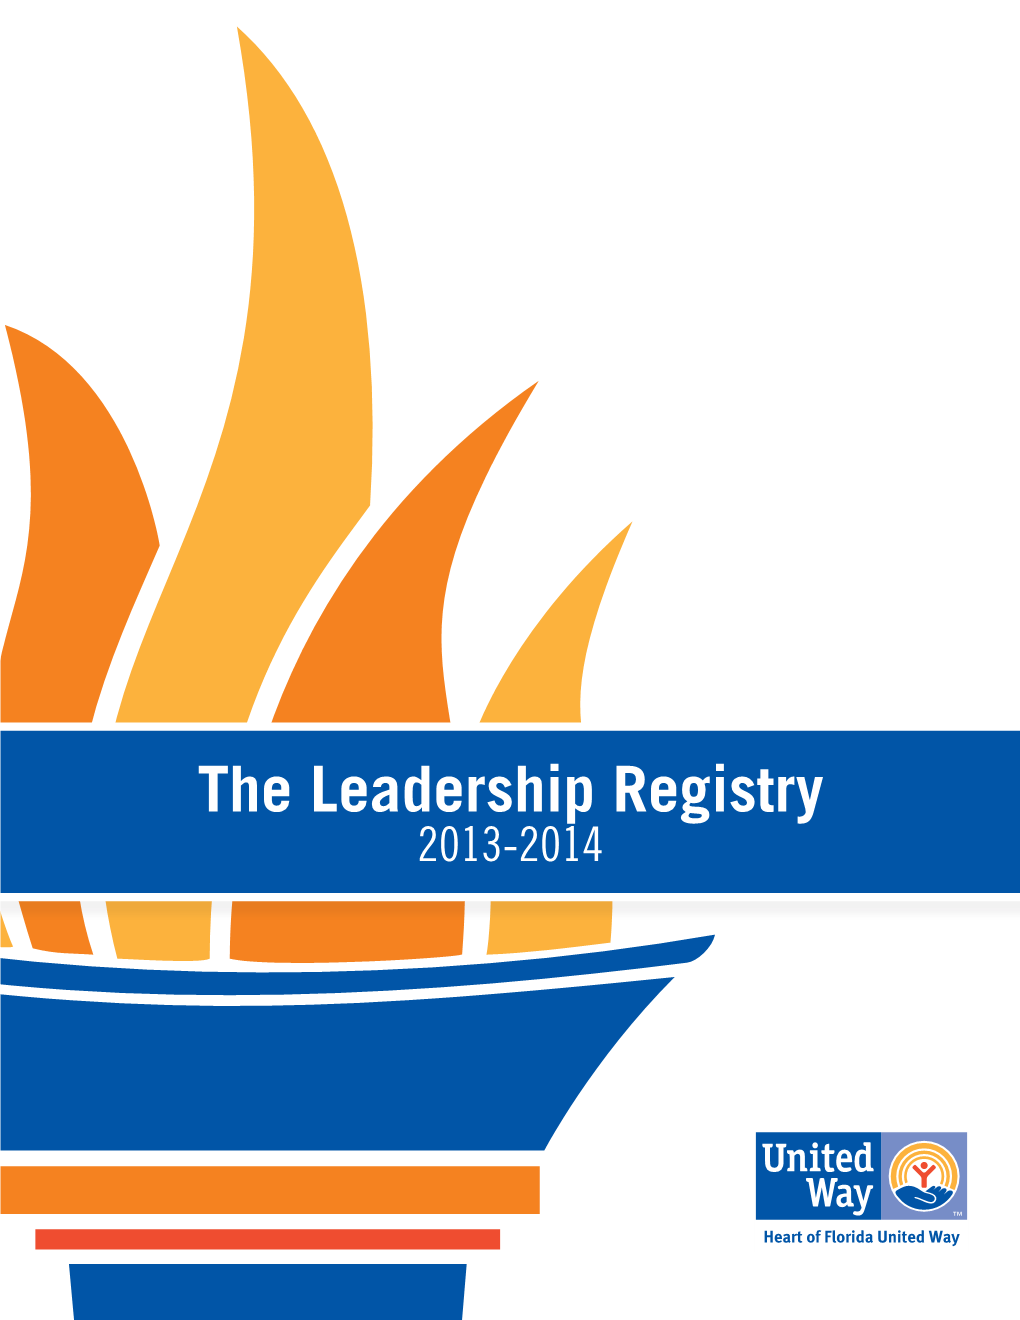 The Leadership Registry 2013-2014 Mission to Improve Lives by Mobilizing the Caring Power of Our Communities